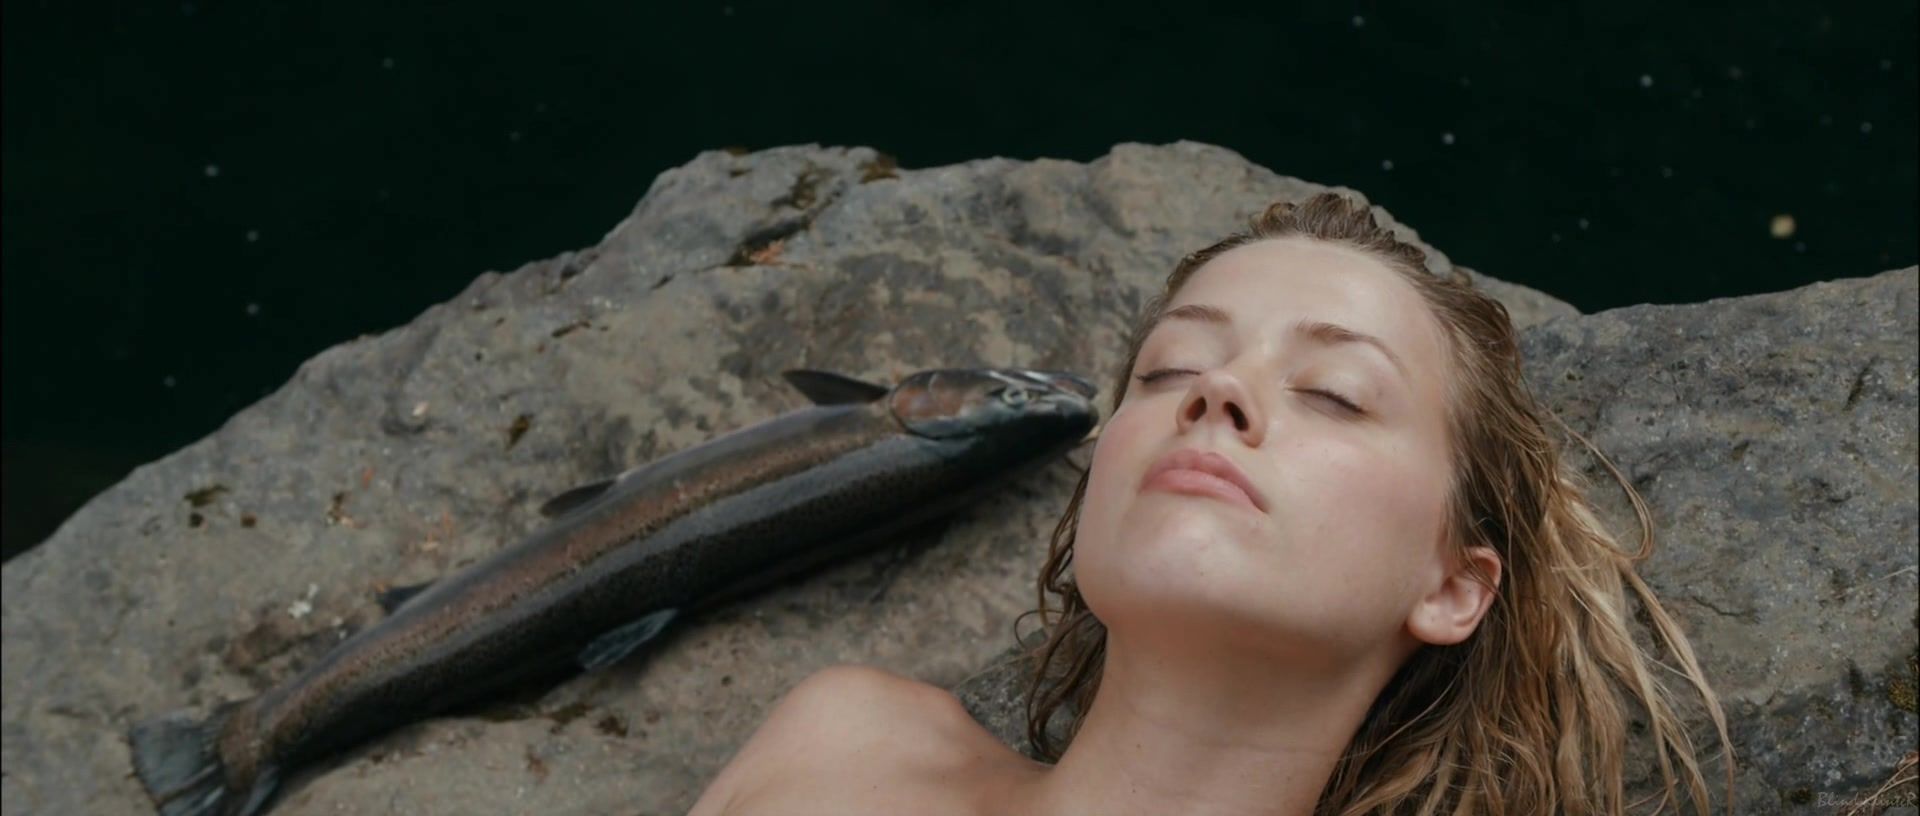 Trio Sex video Amber Heard nude - The River Why (2010) BaDoinkVR - 2